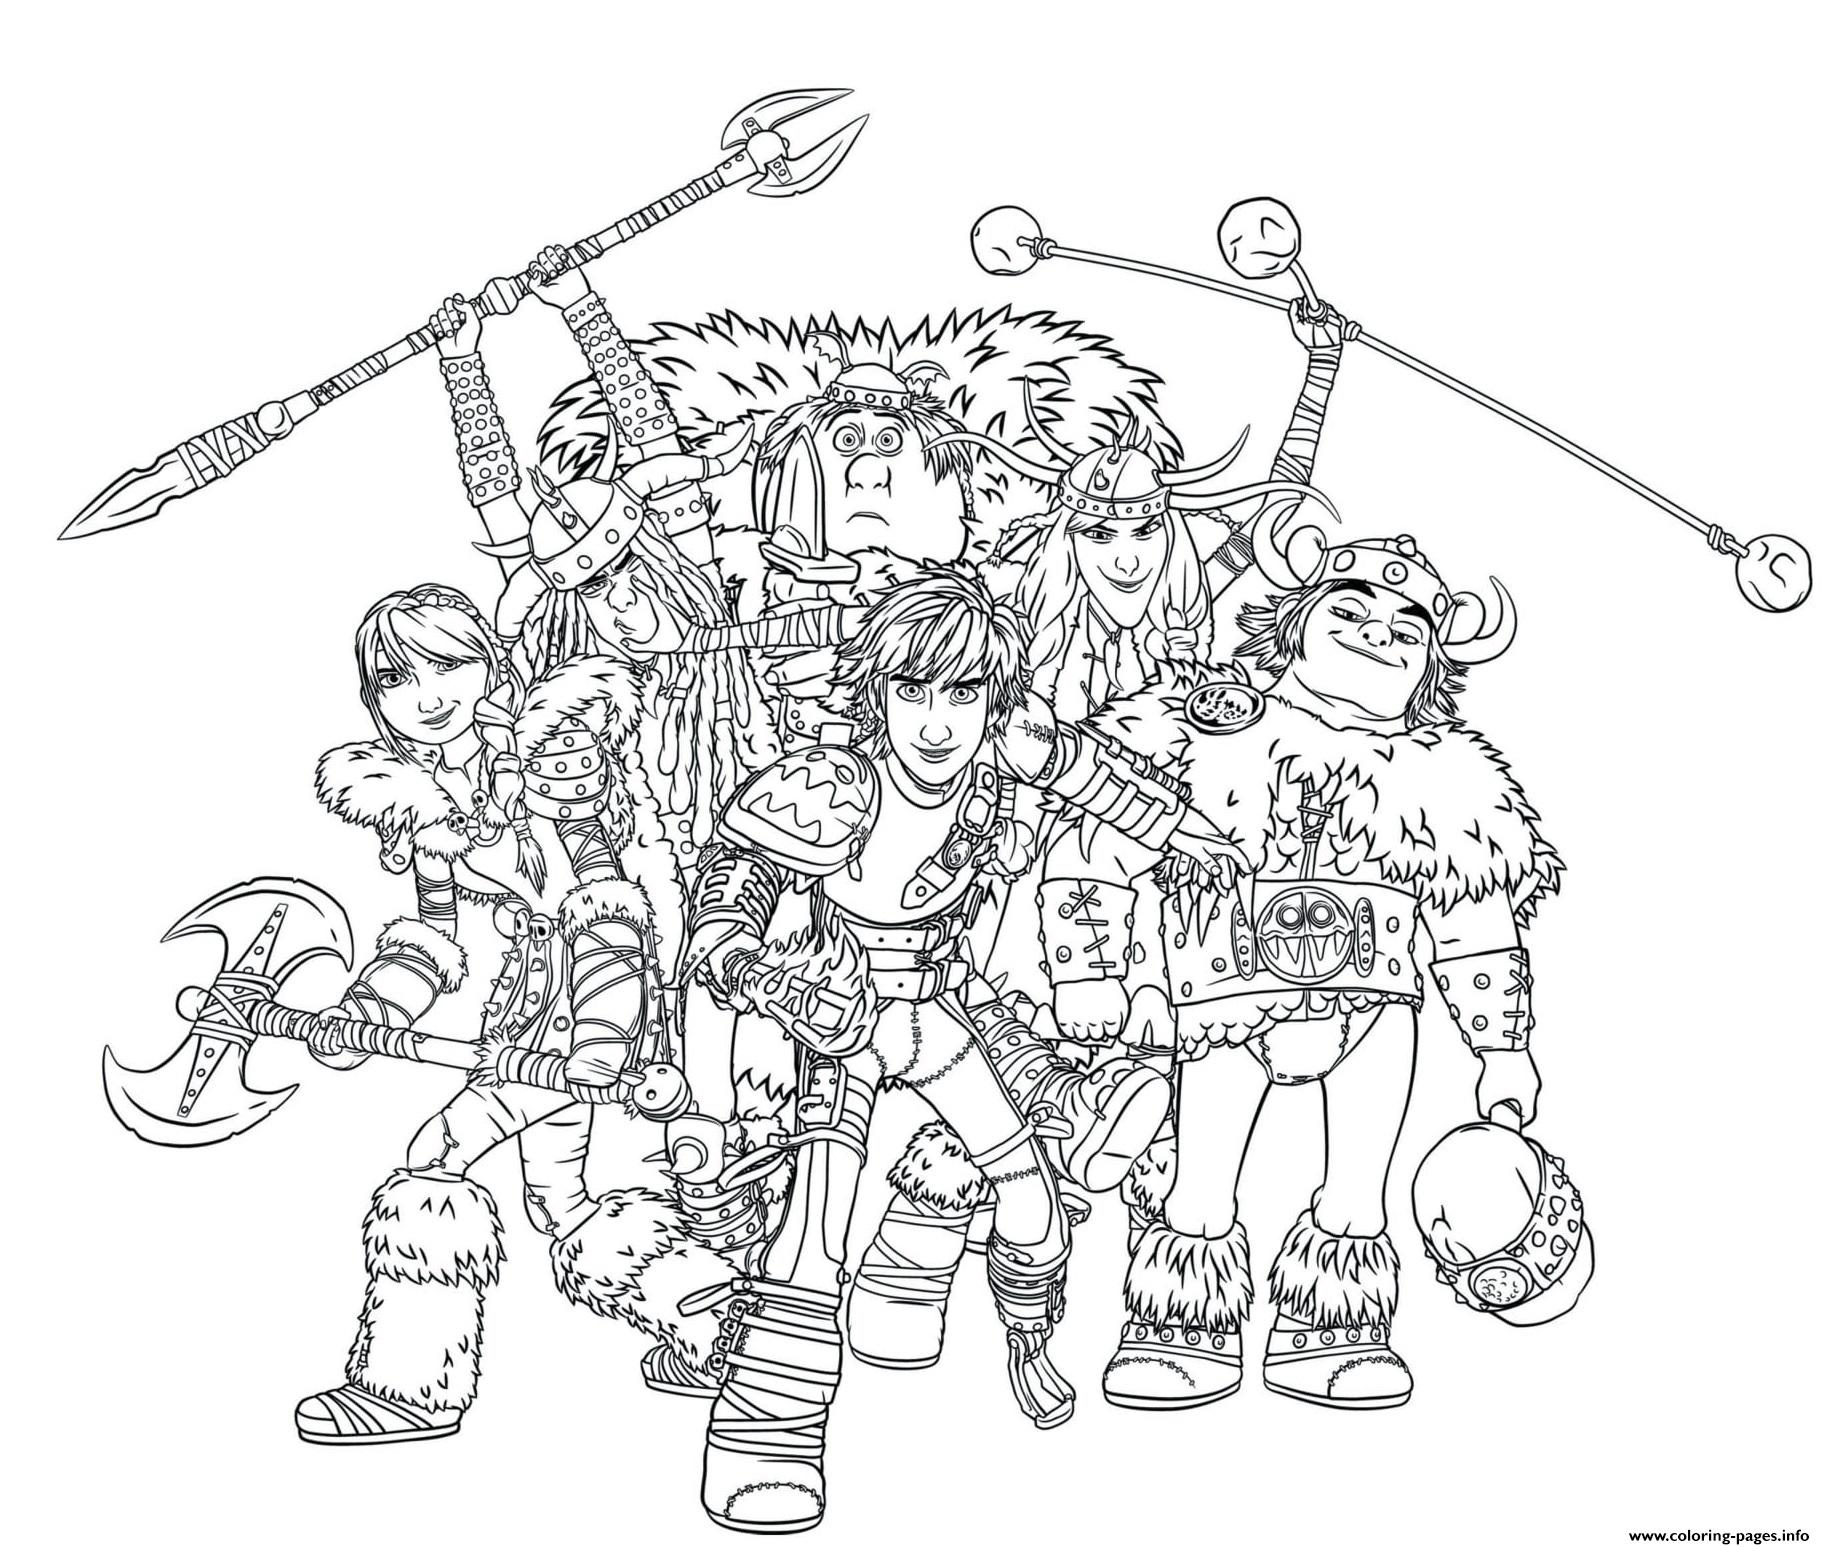 dragon riders how to train your dragons team printable coloring pages book